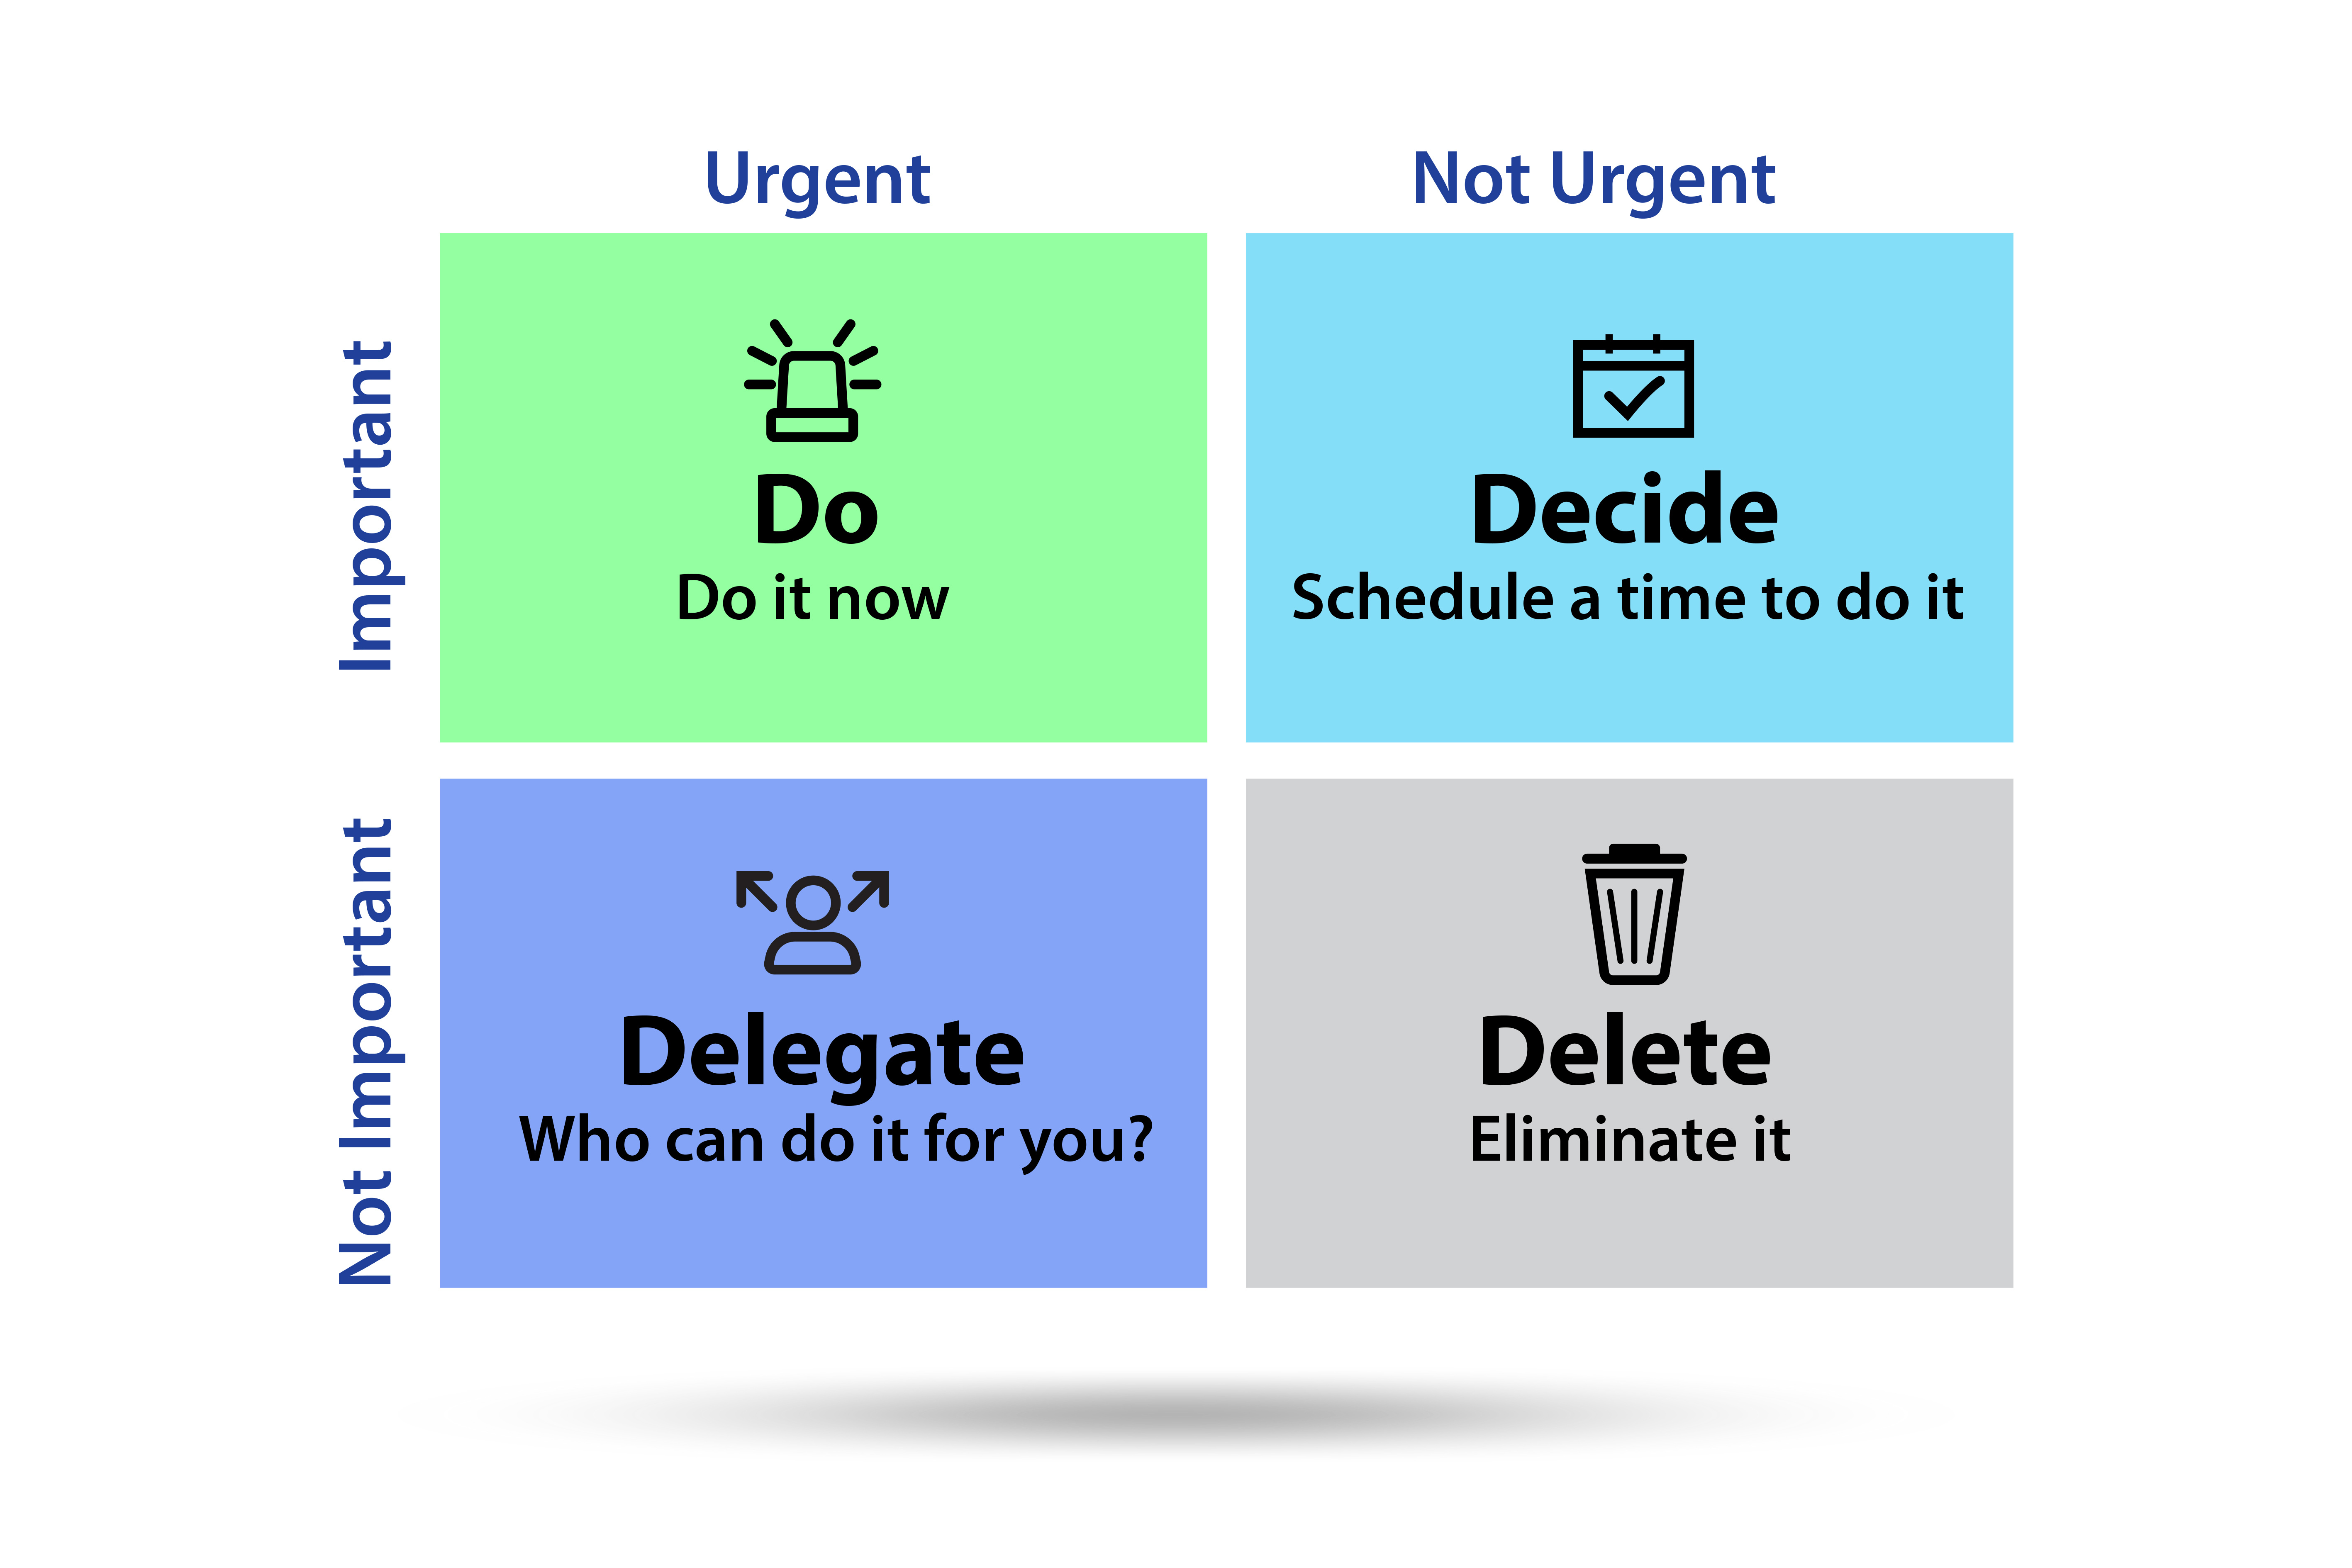 A time management matrix categorizing tasks by urgency and importance with suggested actions: "do it now" for urgent and important, "schedule a time to do it" for not urgent but important, "delegate" for urgent but not important, and "delete" for neither urgent nor important.